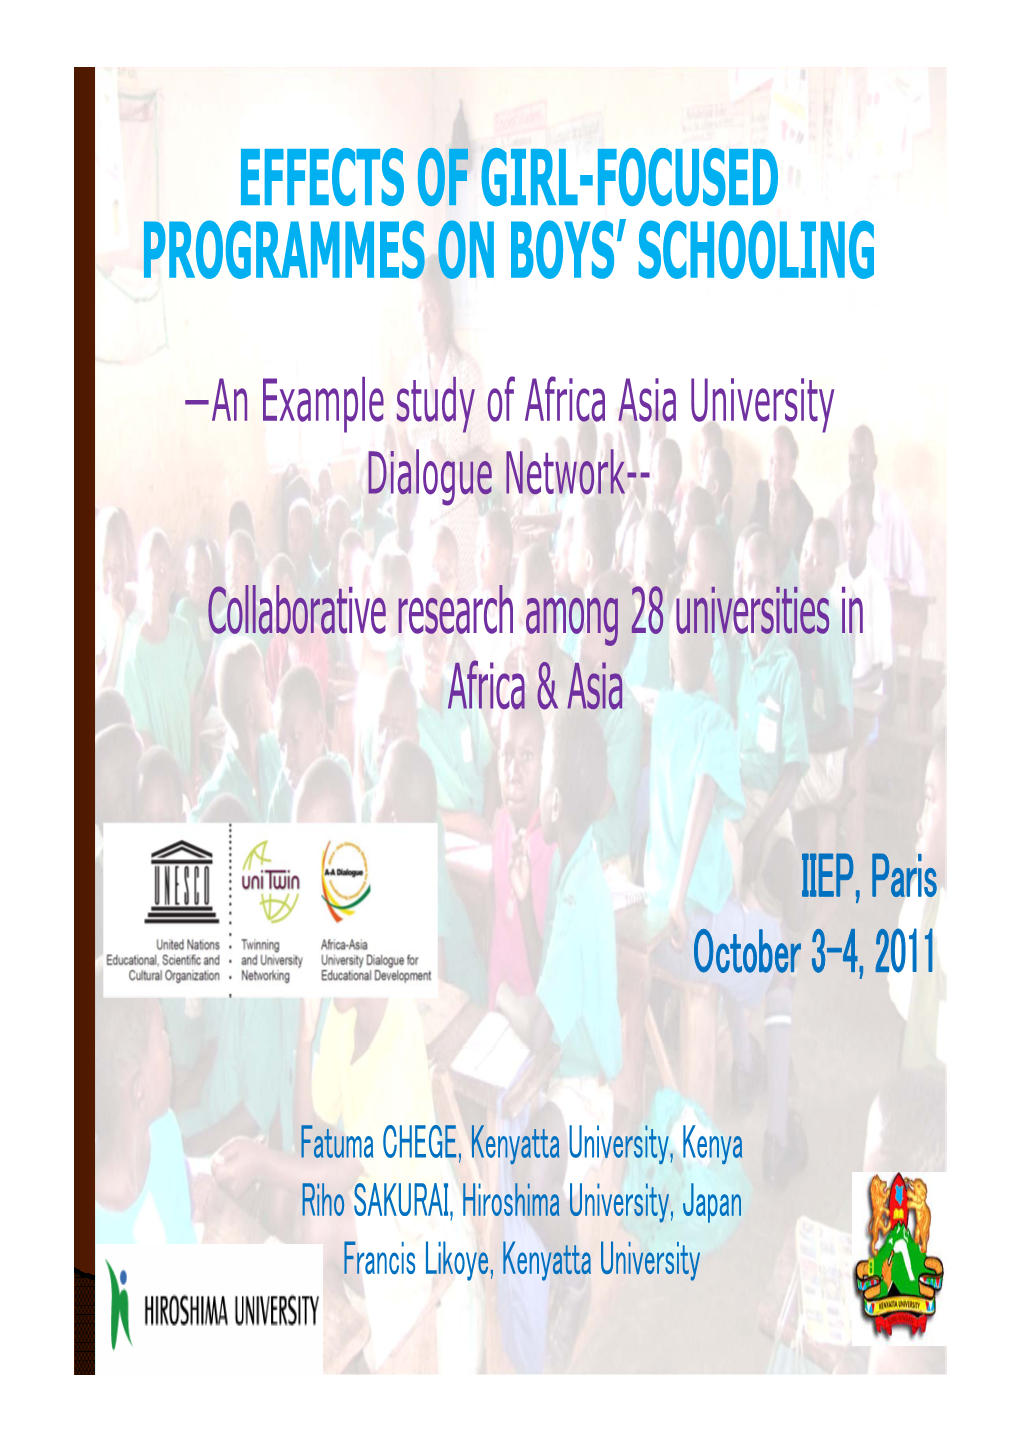 Effects of Girl-Focused Programmes on Boys’ Schooling